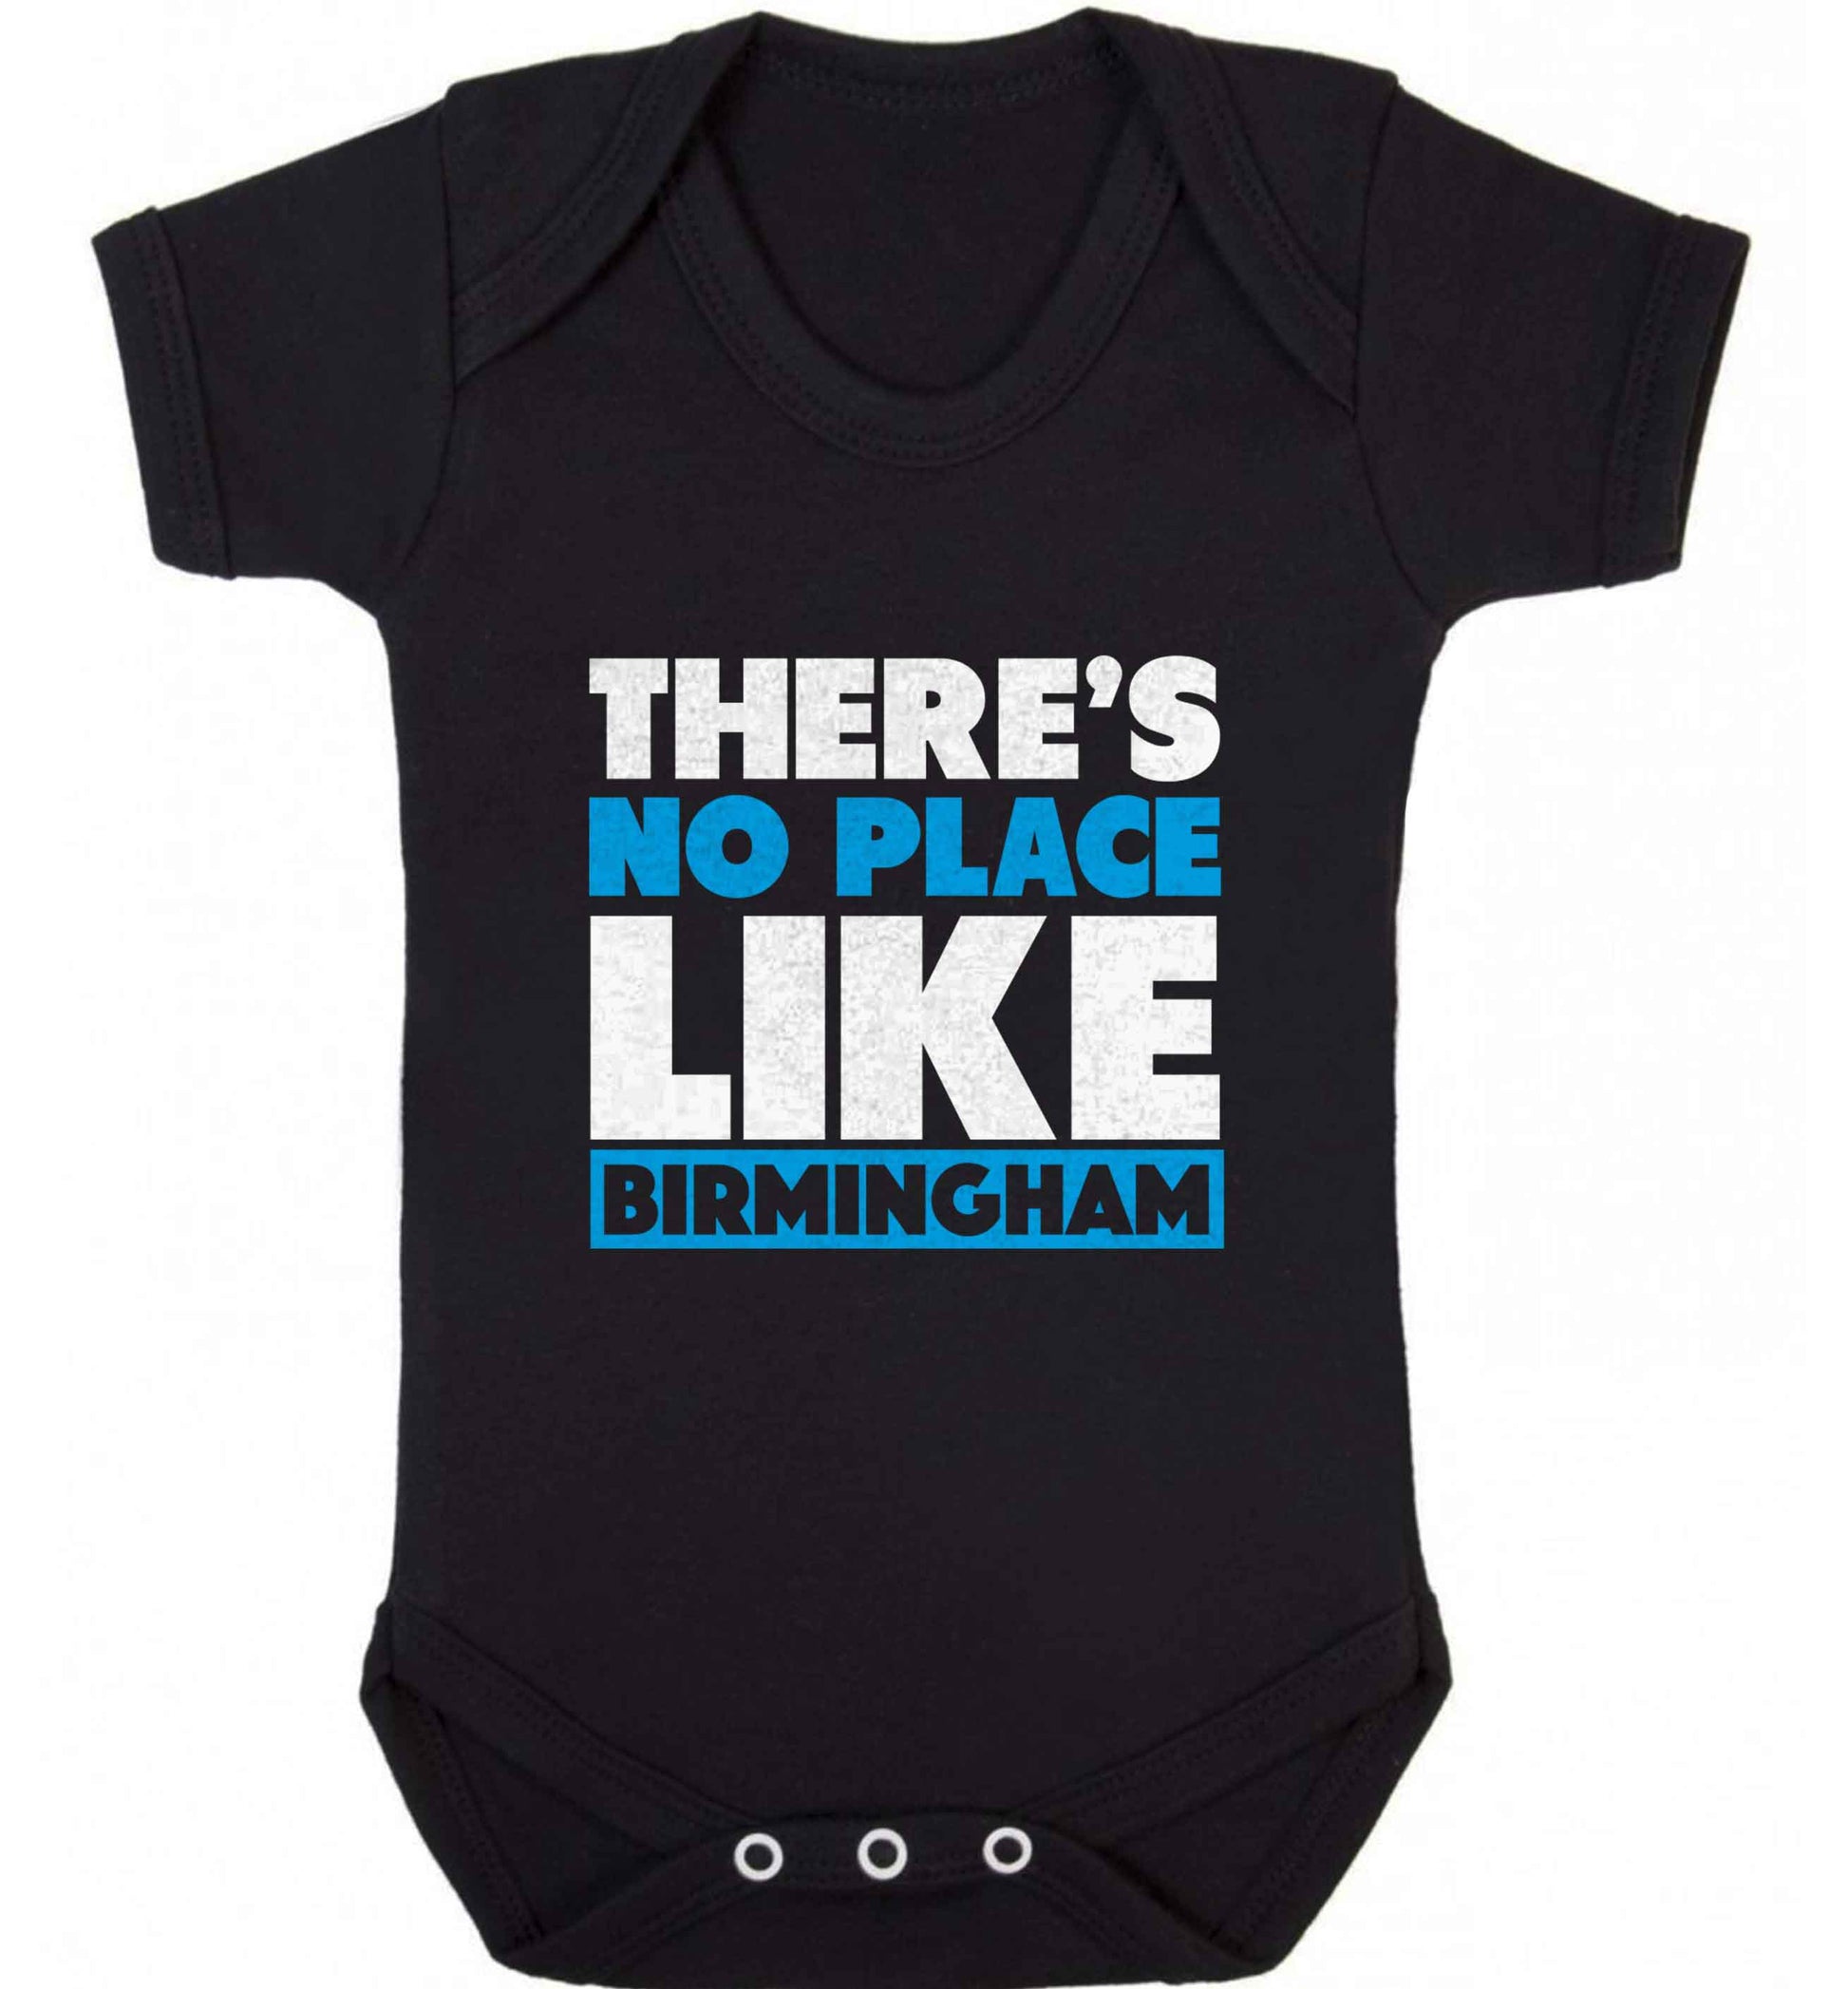 There's no place like Birmingham baby vest black 18-24 months